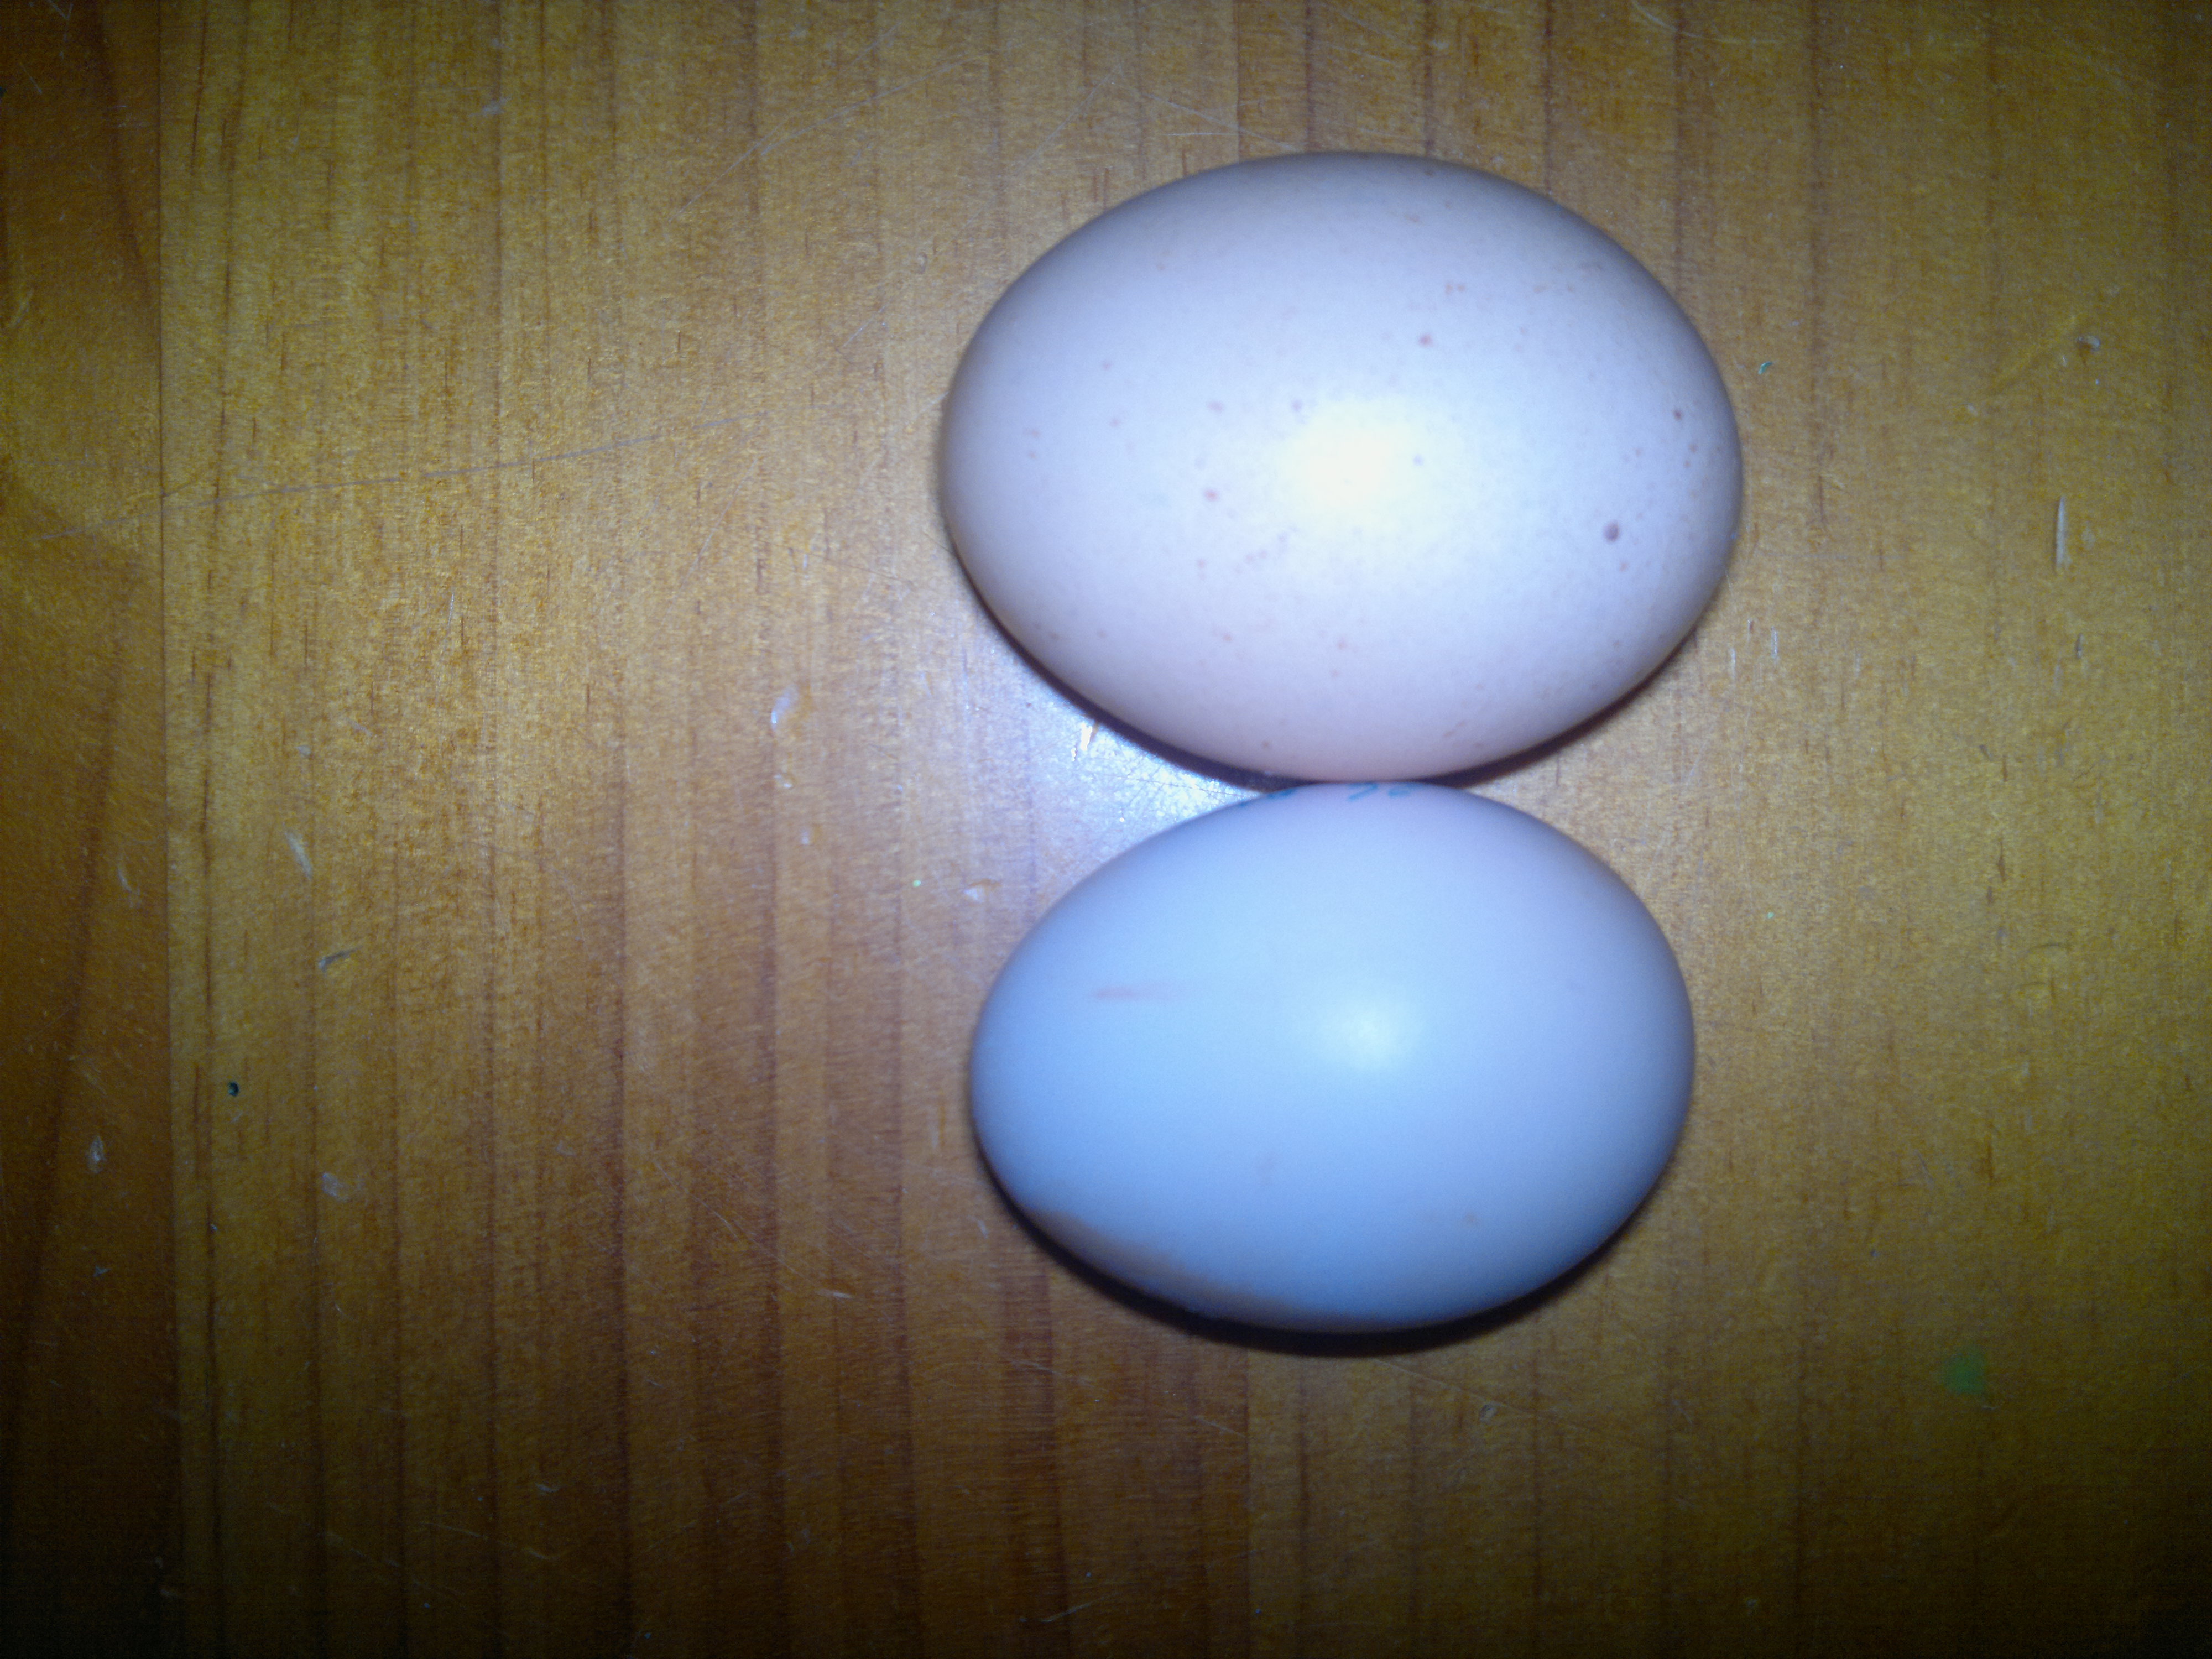 26032012450.jpg
The smaller one is ours, i think its bluish because of the flash. It looks brown! :D